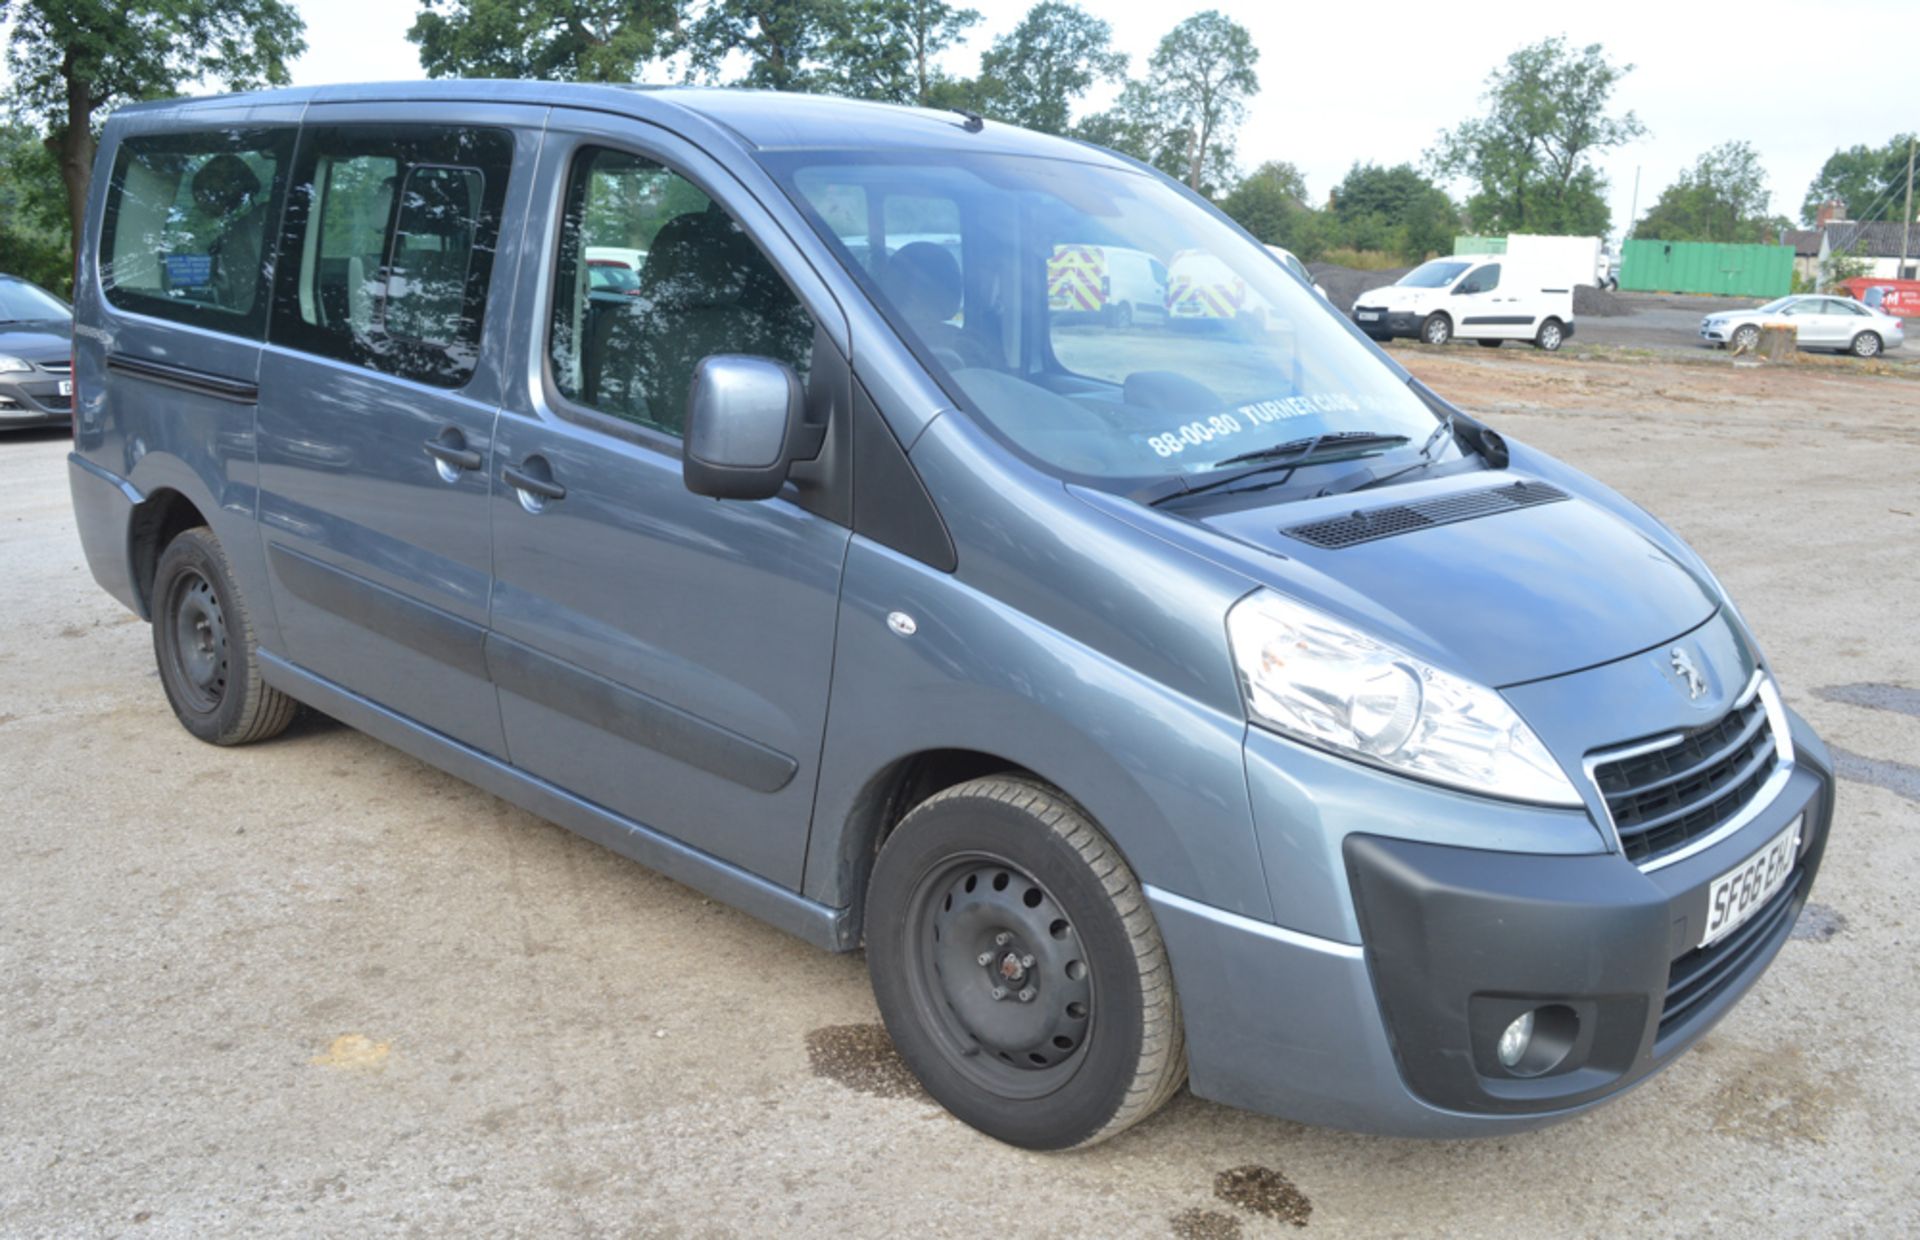 Peugeot Expert Tepee Independence SE Plus 6 seat minibus Registration number: SF66 EHJ Date of